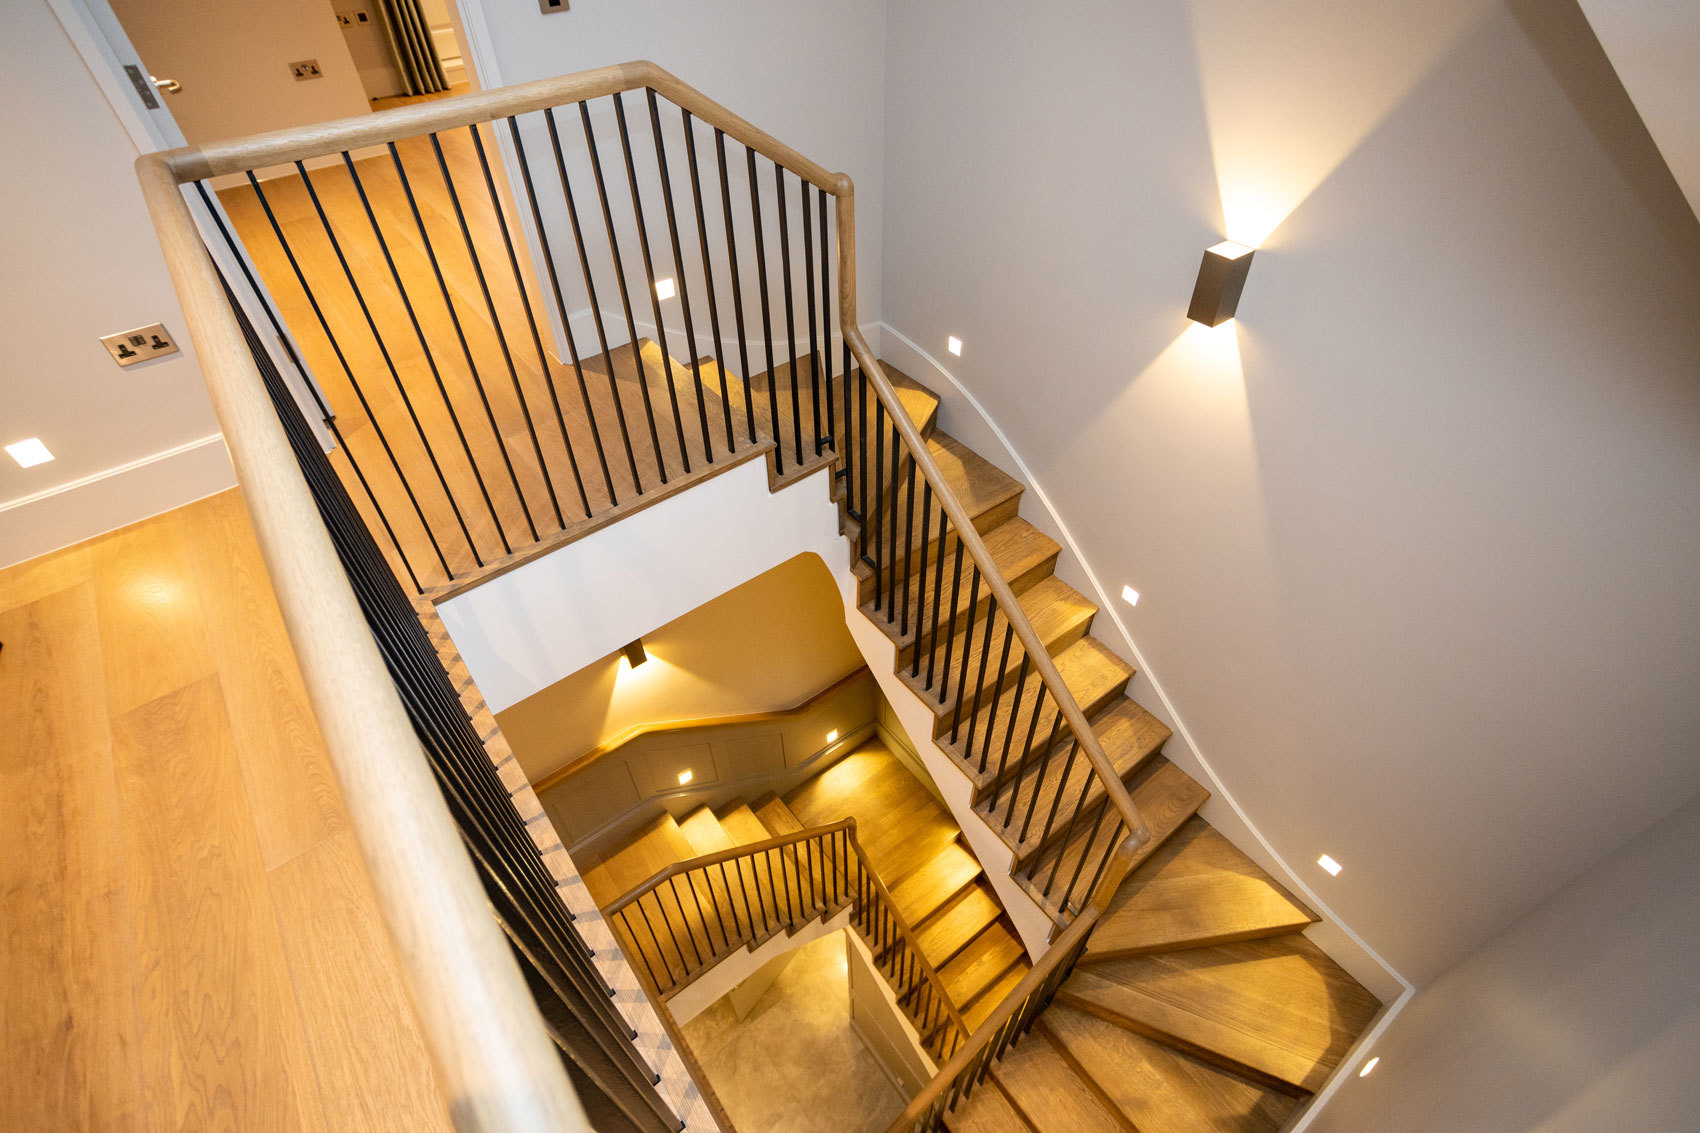 Winder staircases for extra space and headroom